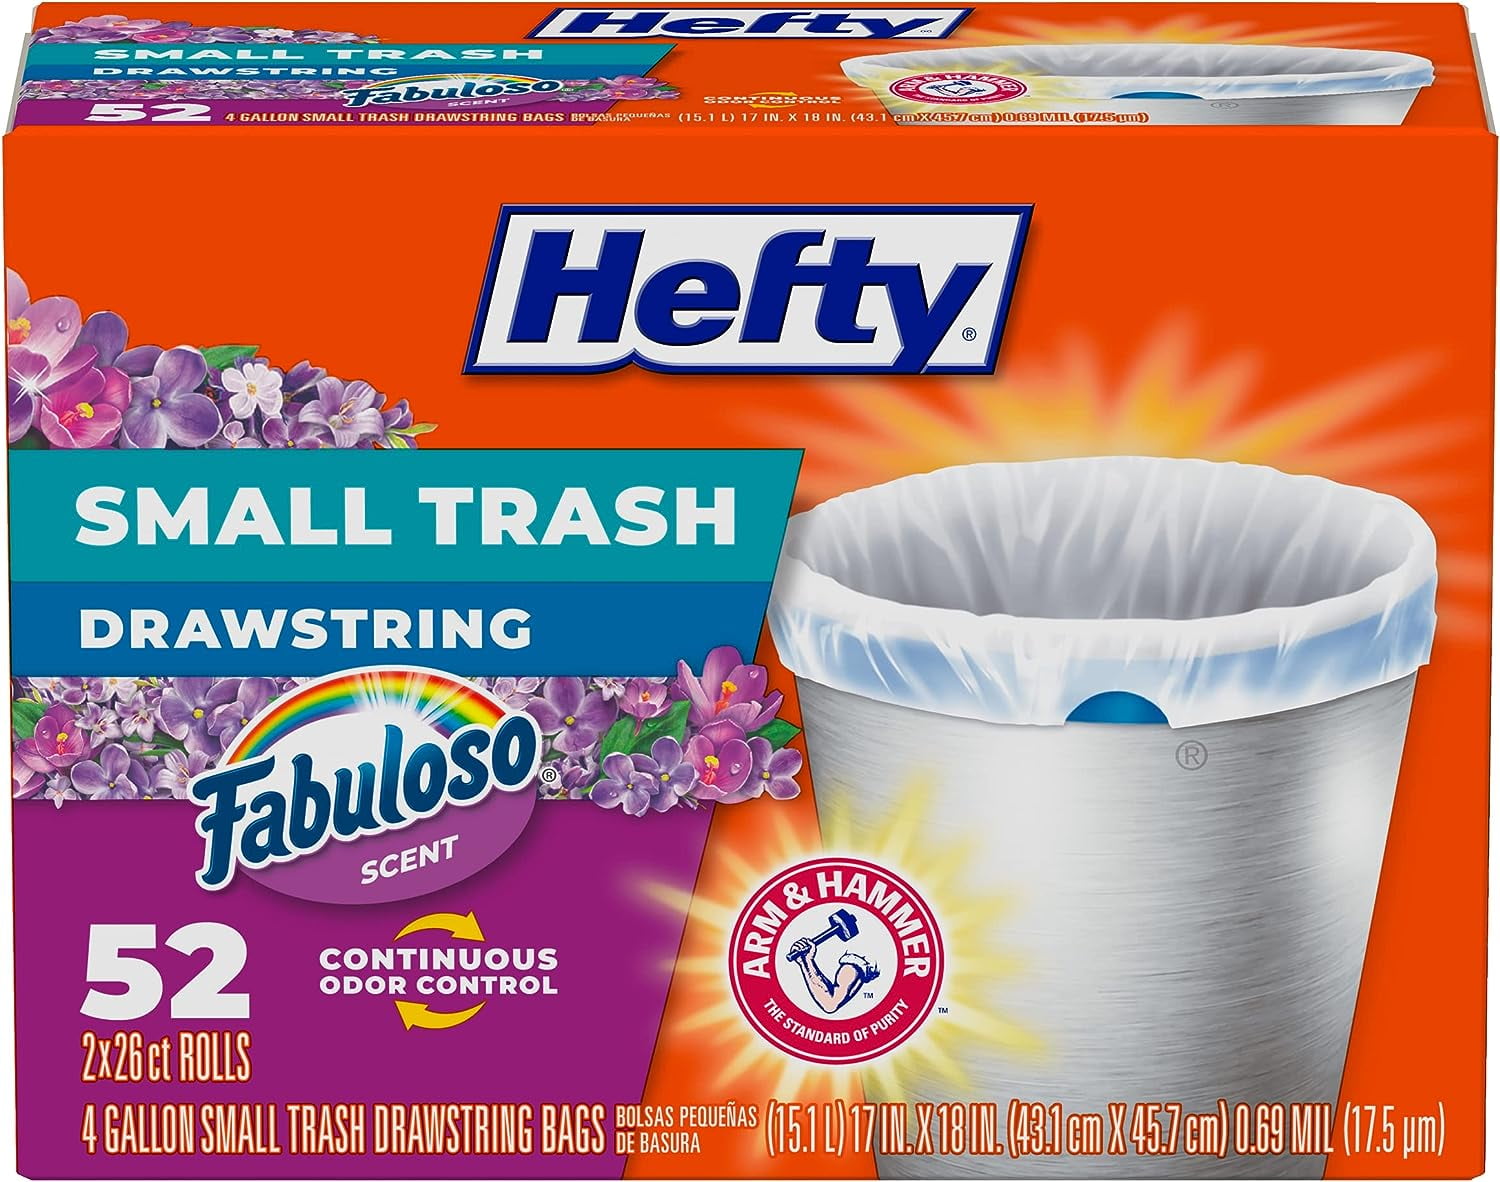 Hefty Small Trash Bags - Lavender & Sweet Vailla scent for Sale in Colton,  CA - OfferUp